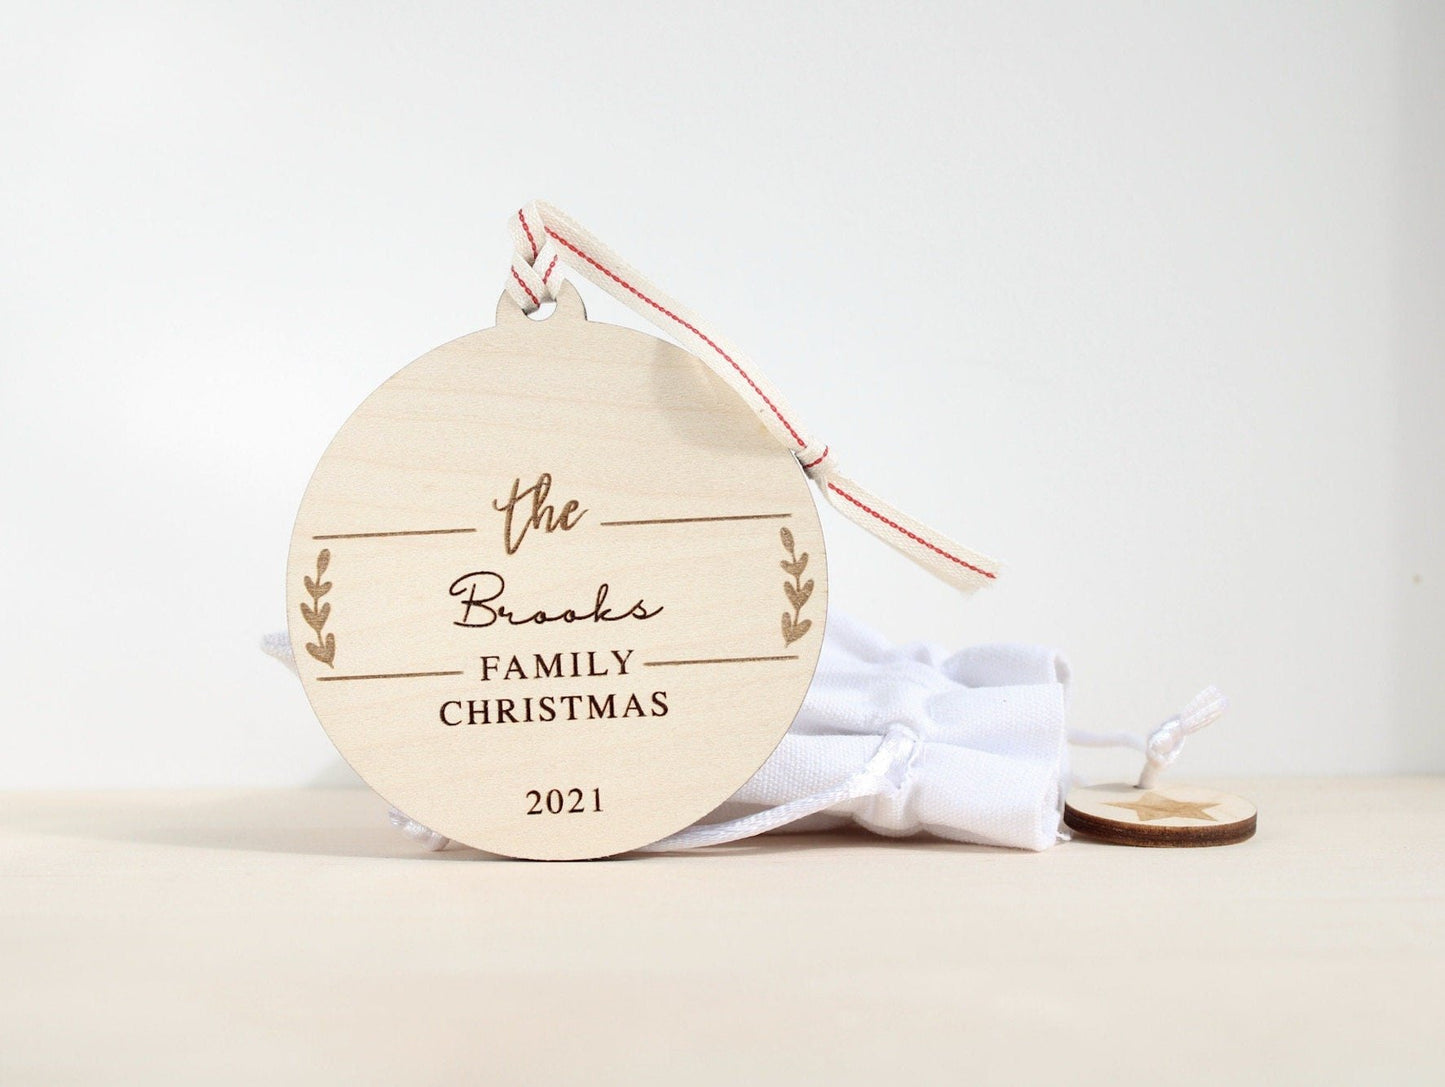 Personalised family Christmas bauble decoration